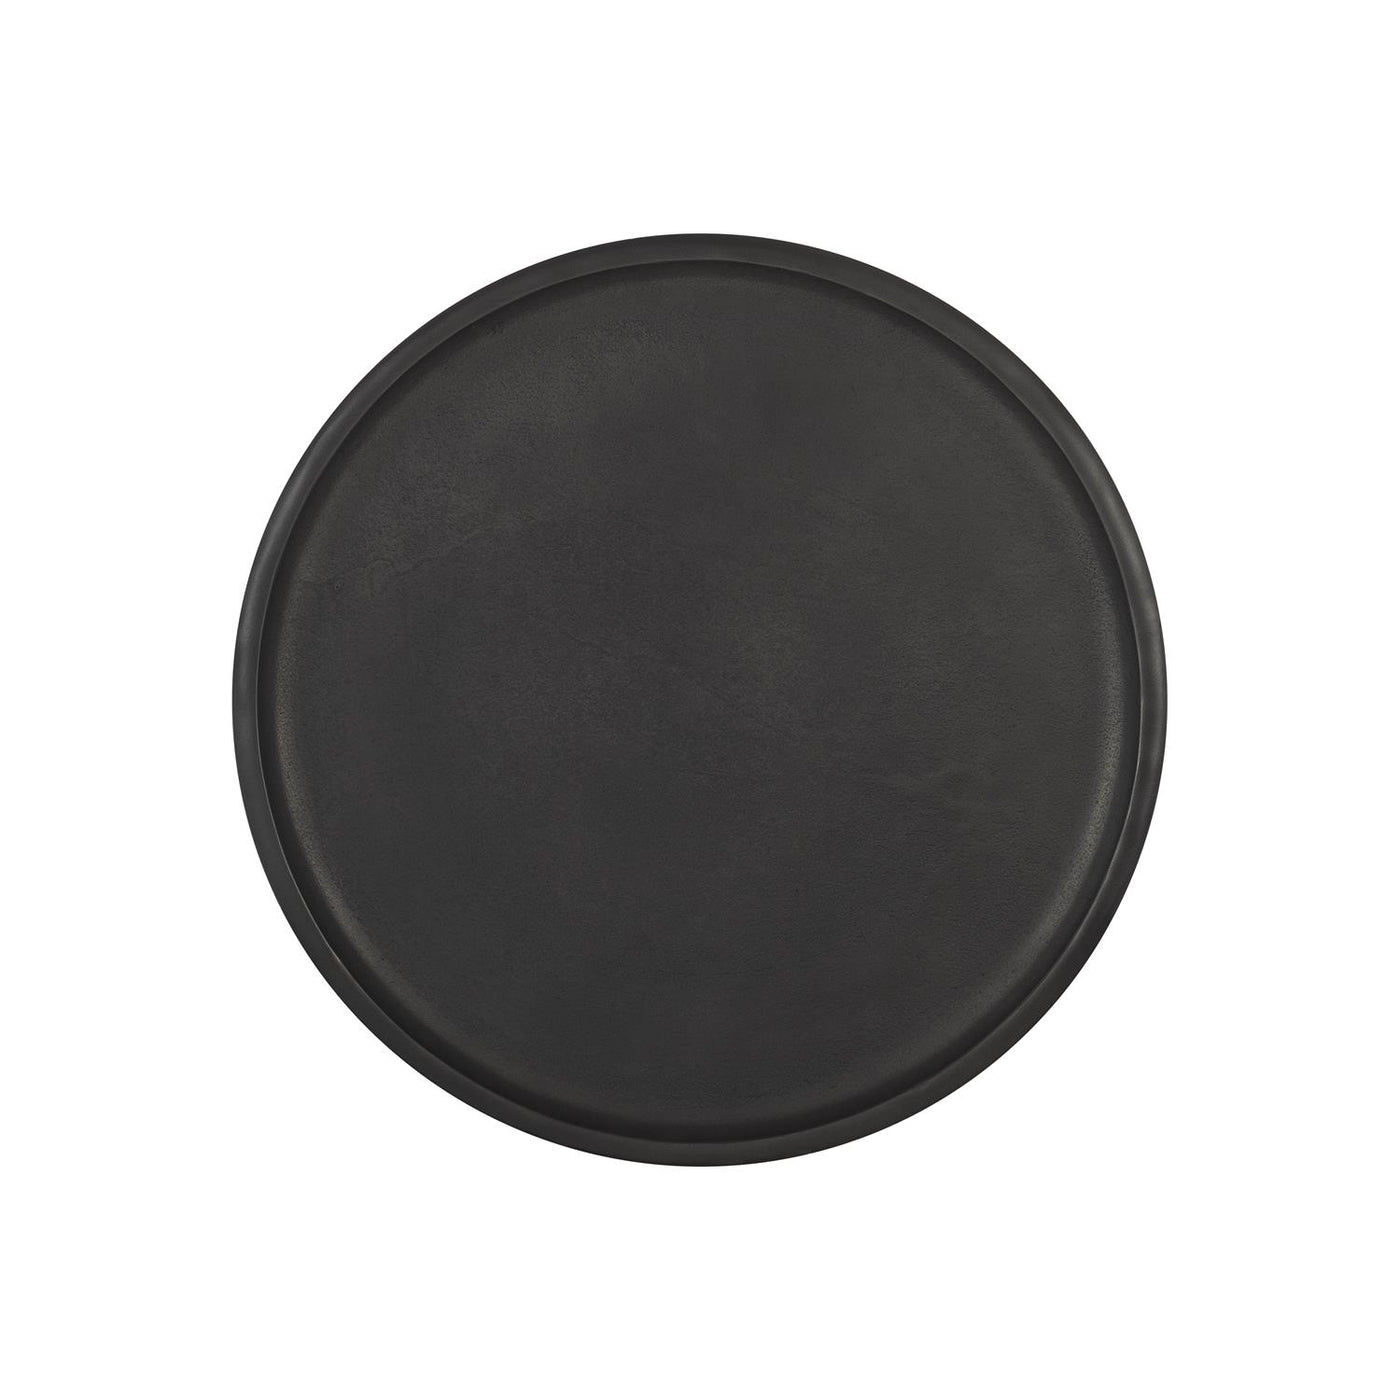 TABLE SIDE ROUND BLACK TEXTURED METAL